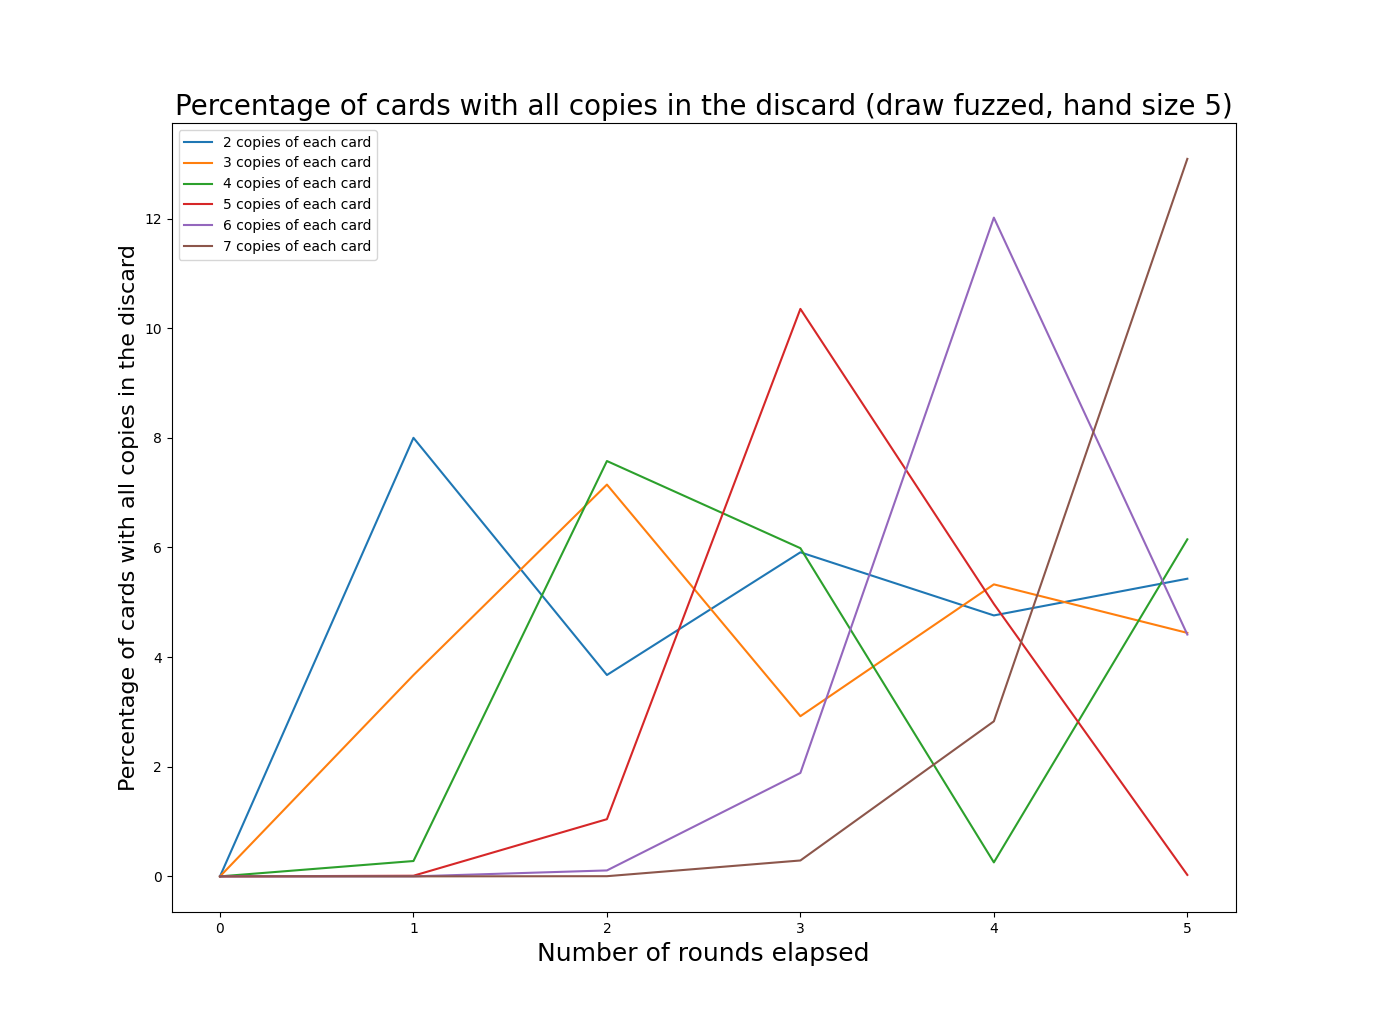 Expected percentage of 'lost options' with a fuzzed 5 card hand